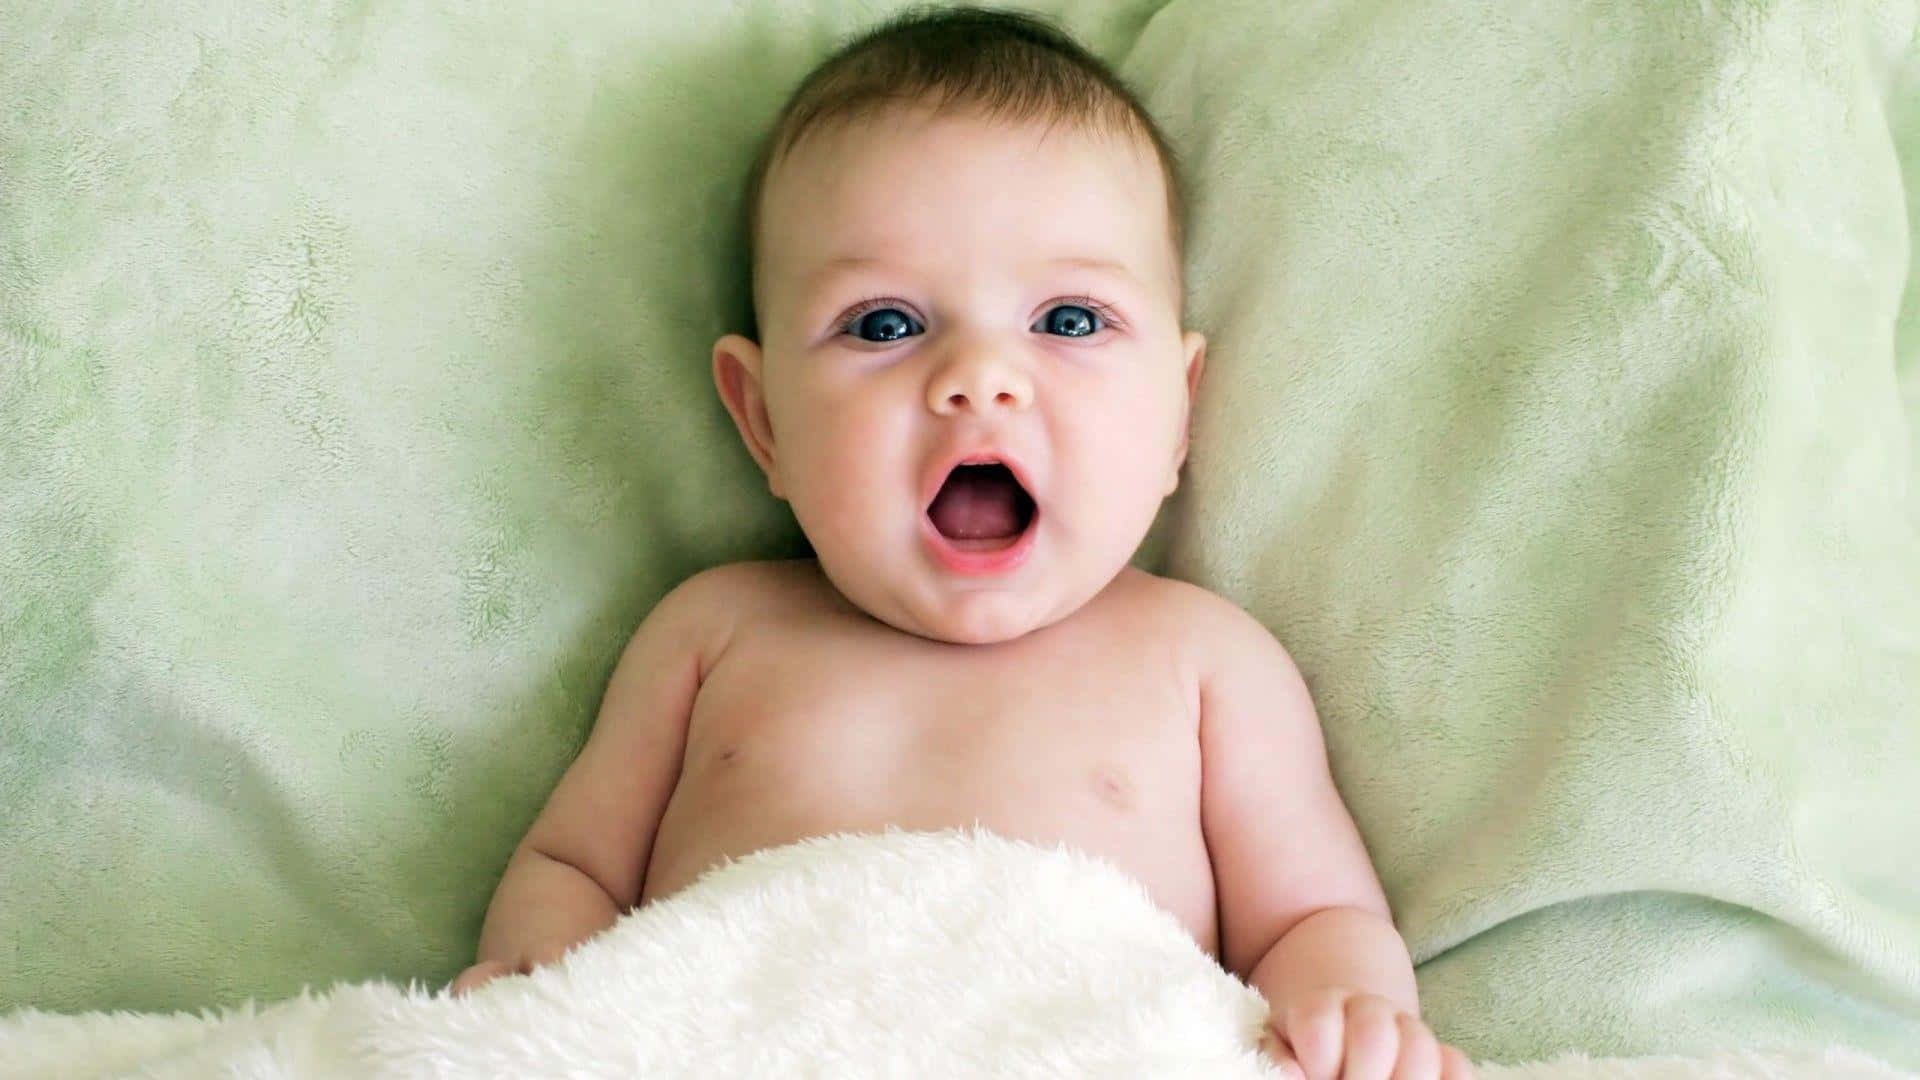 A Baby Is Laying On A Green Blanket With Its Mouth Open